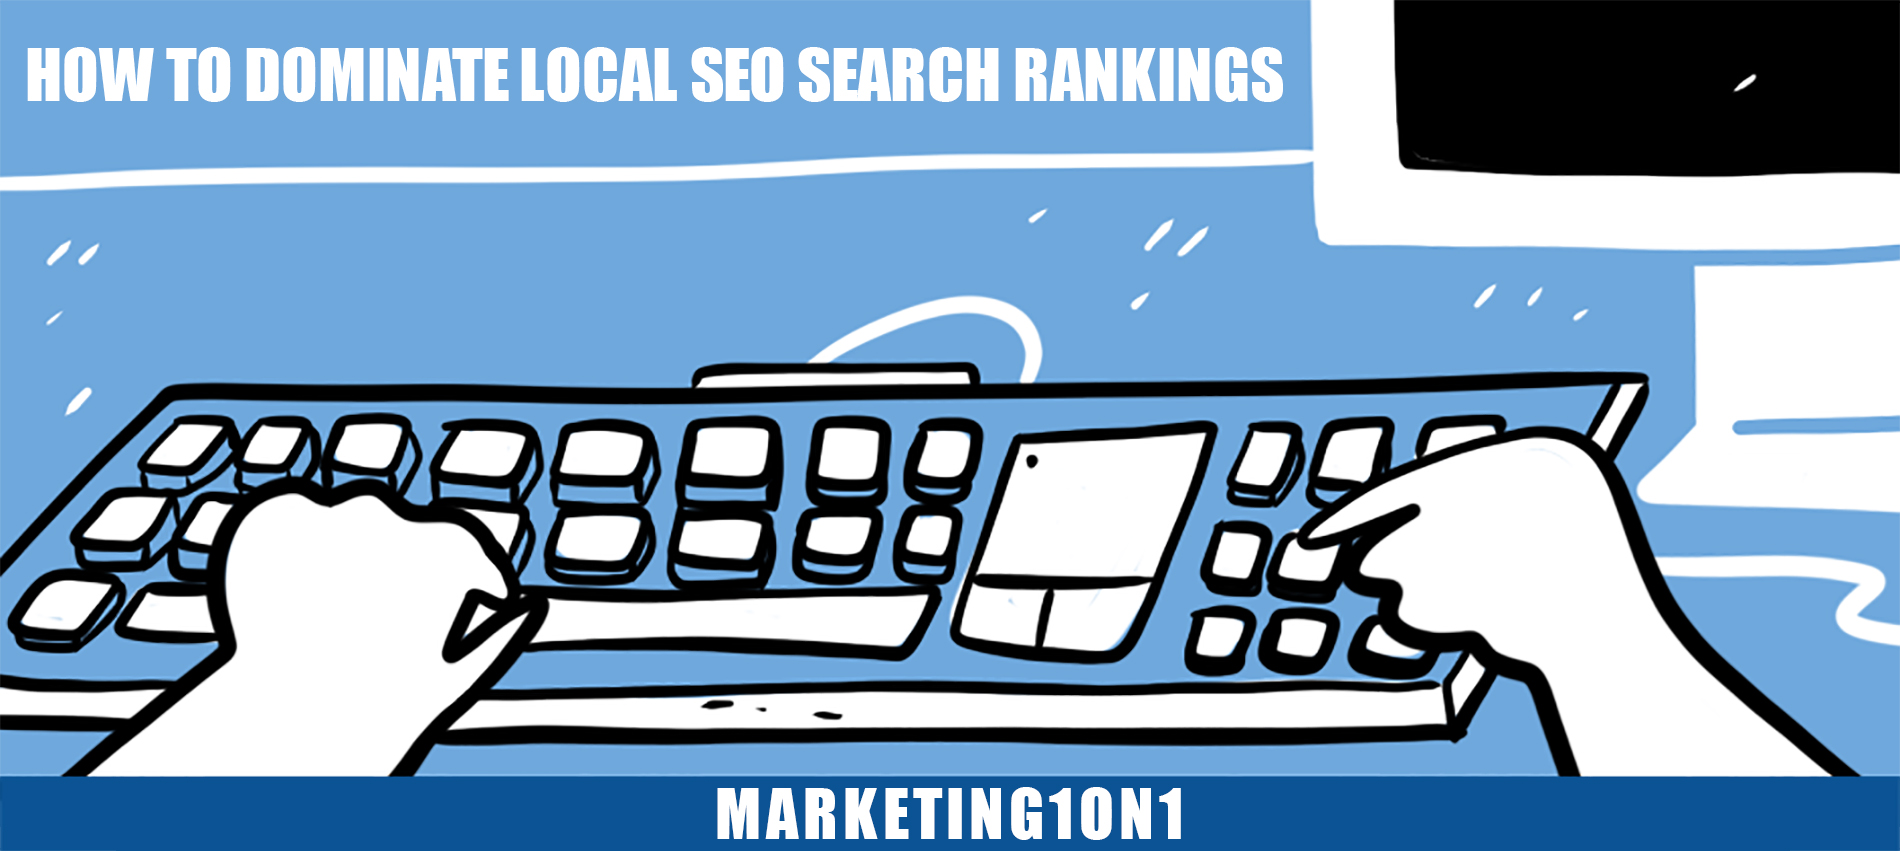 How to dominate local SEO search rankings?